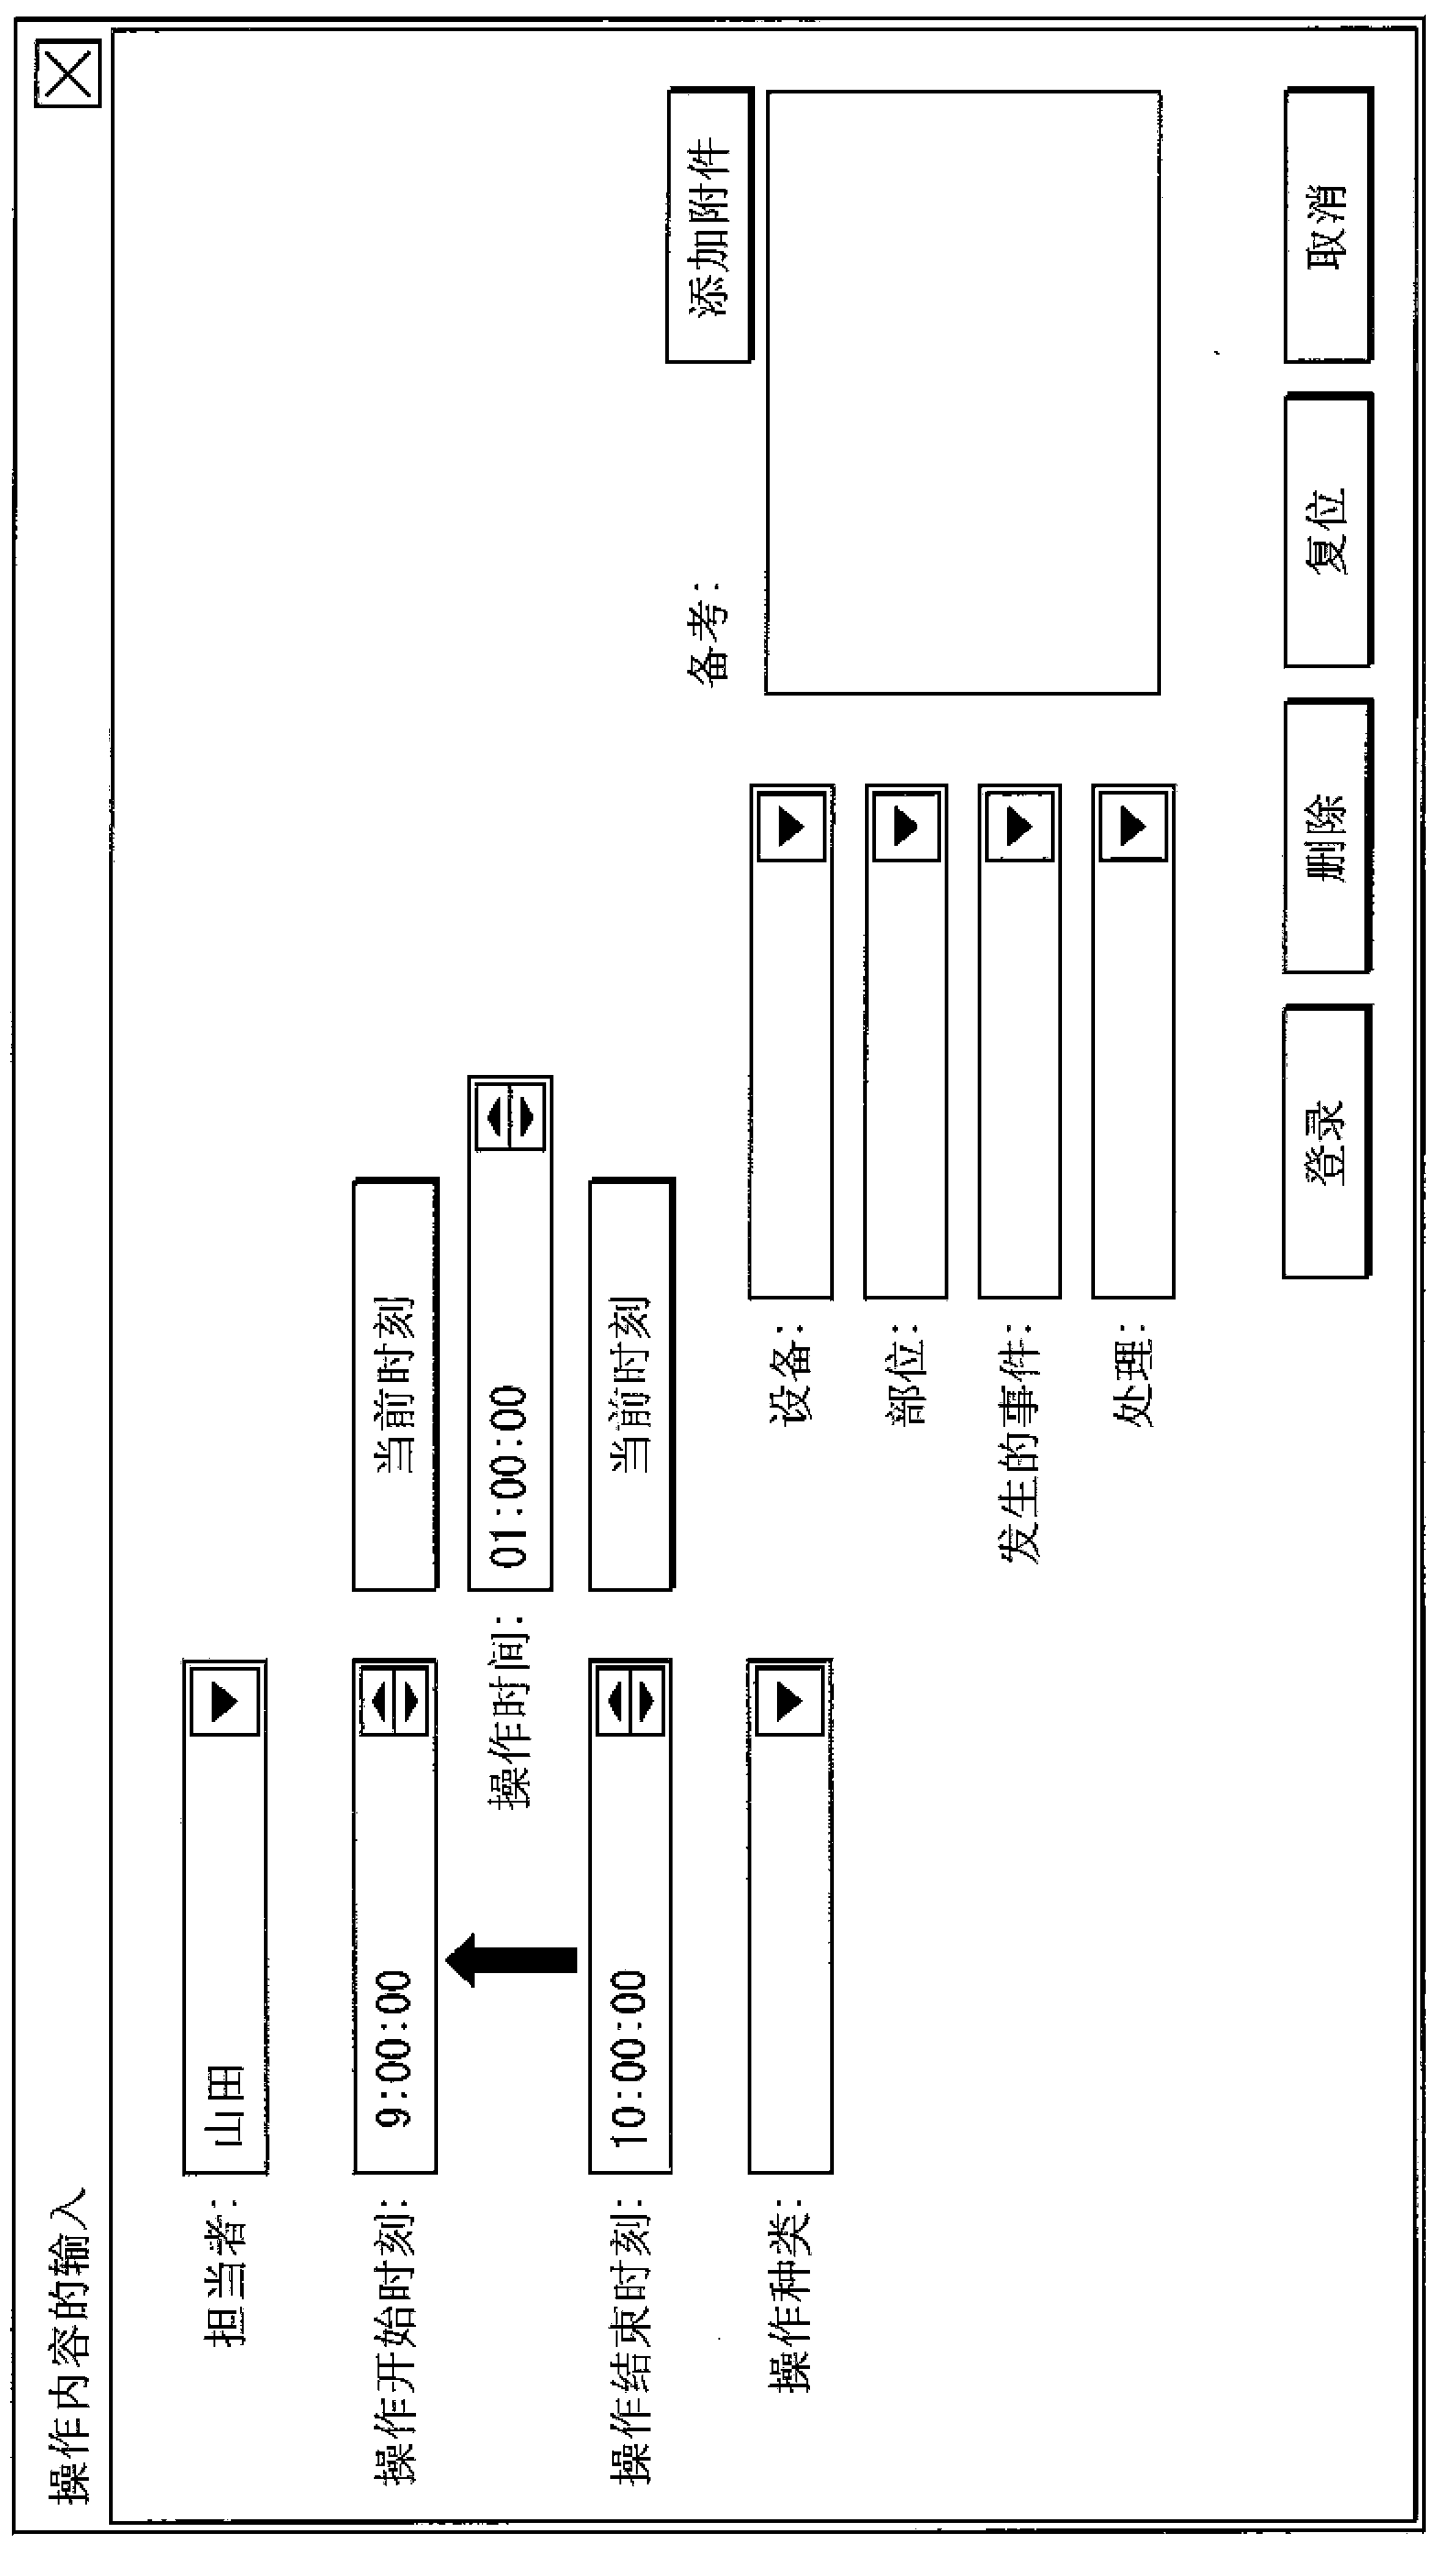 Work information recording apparatus, and method and program for controlling same